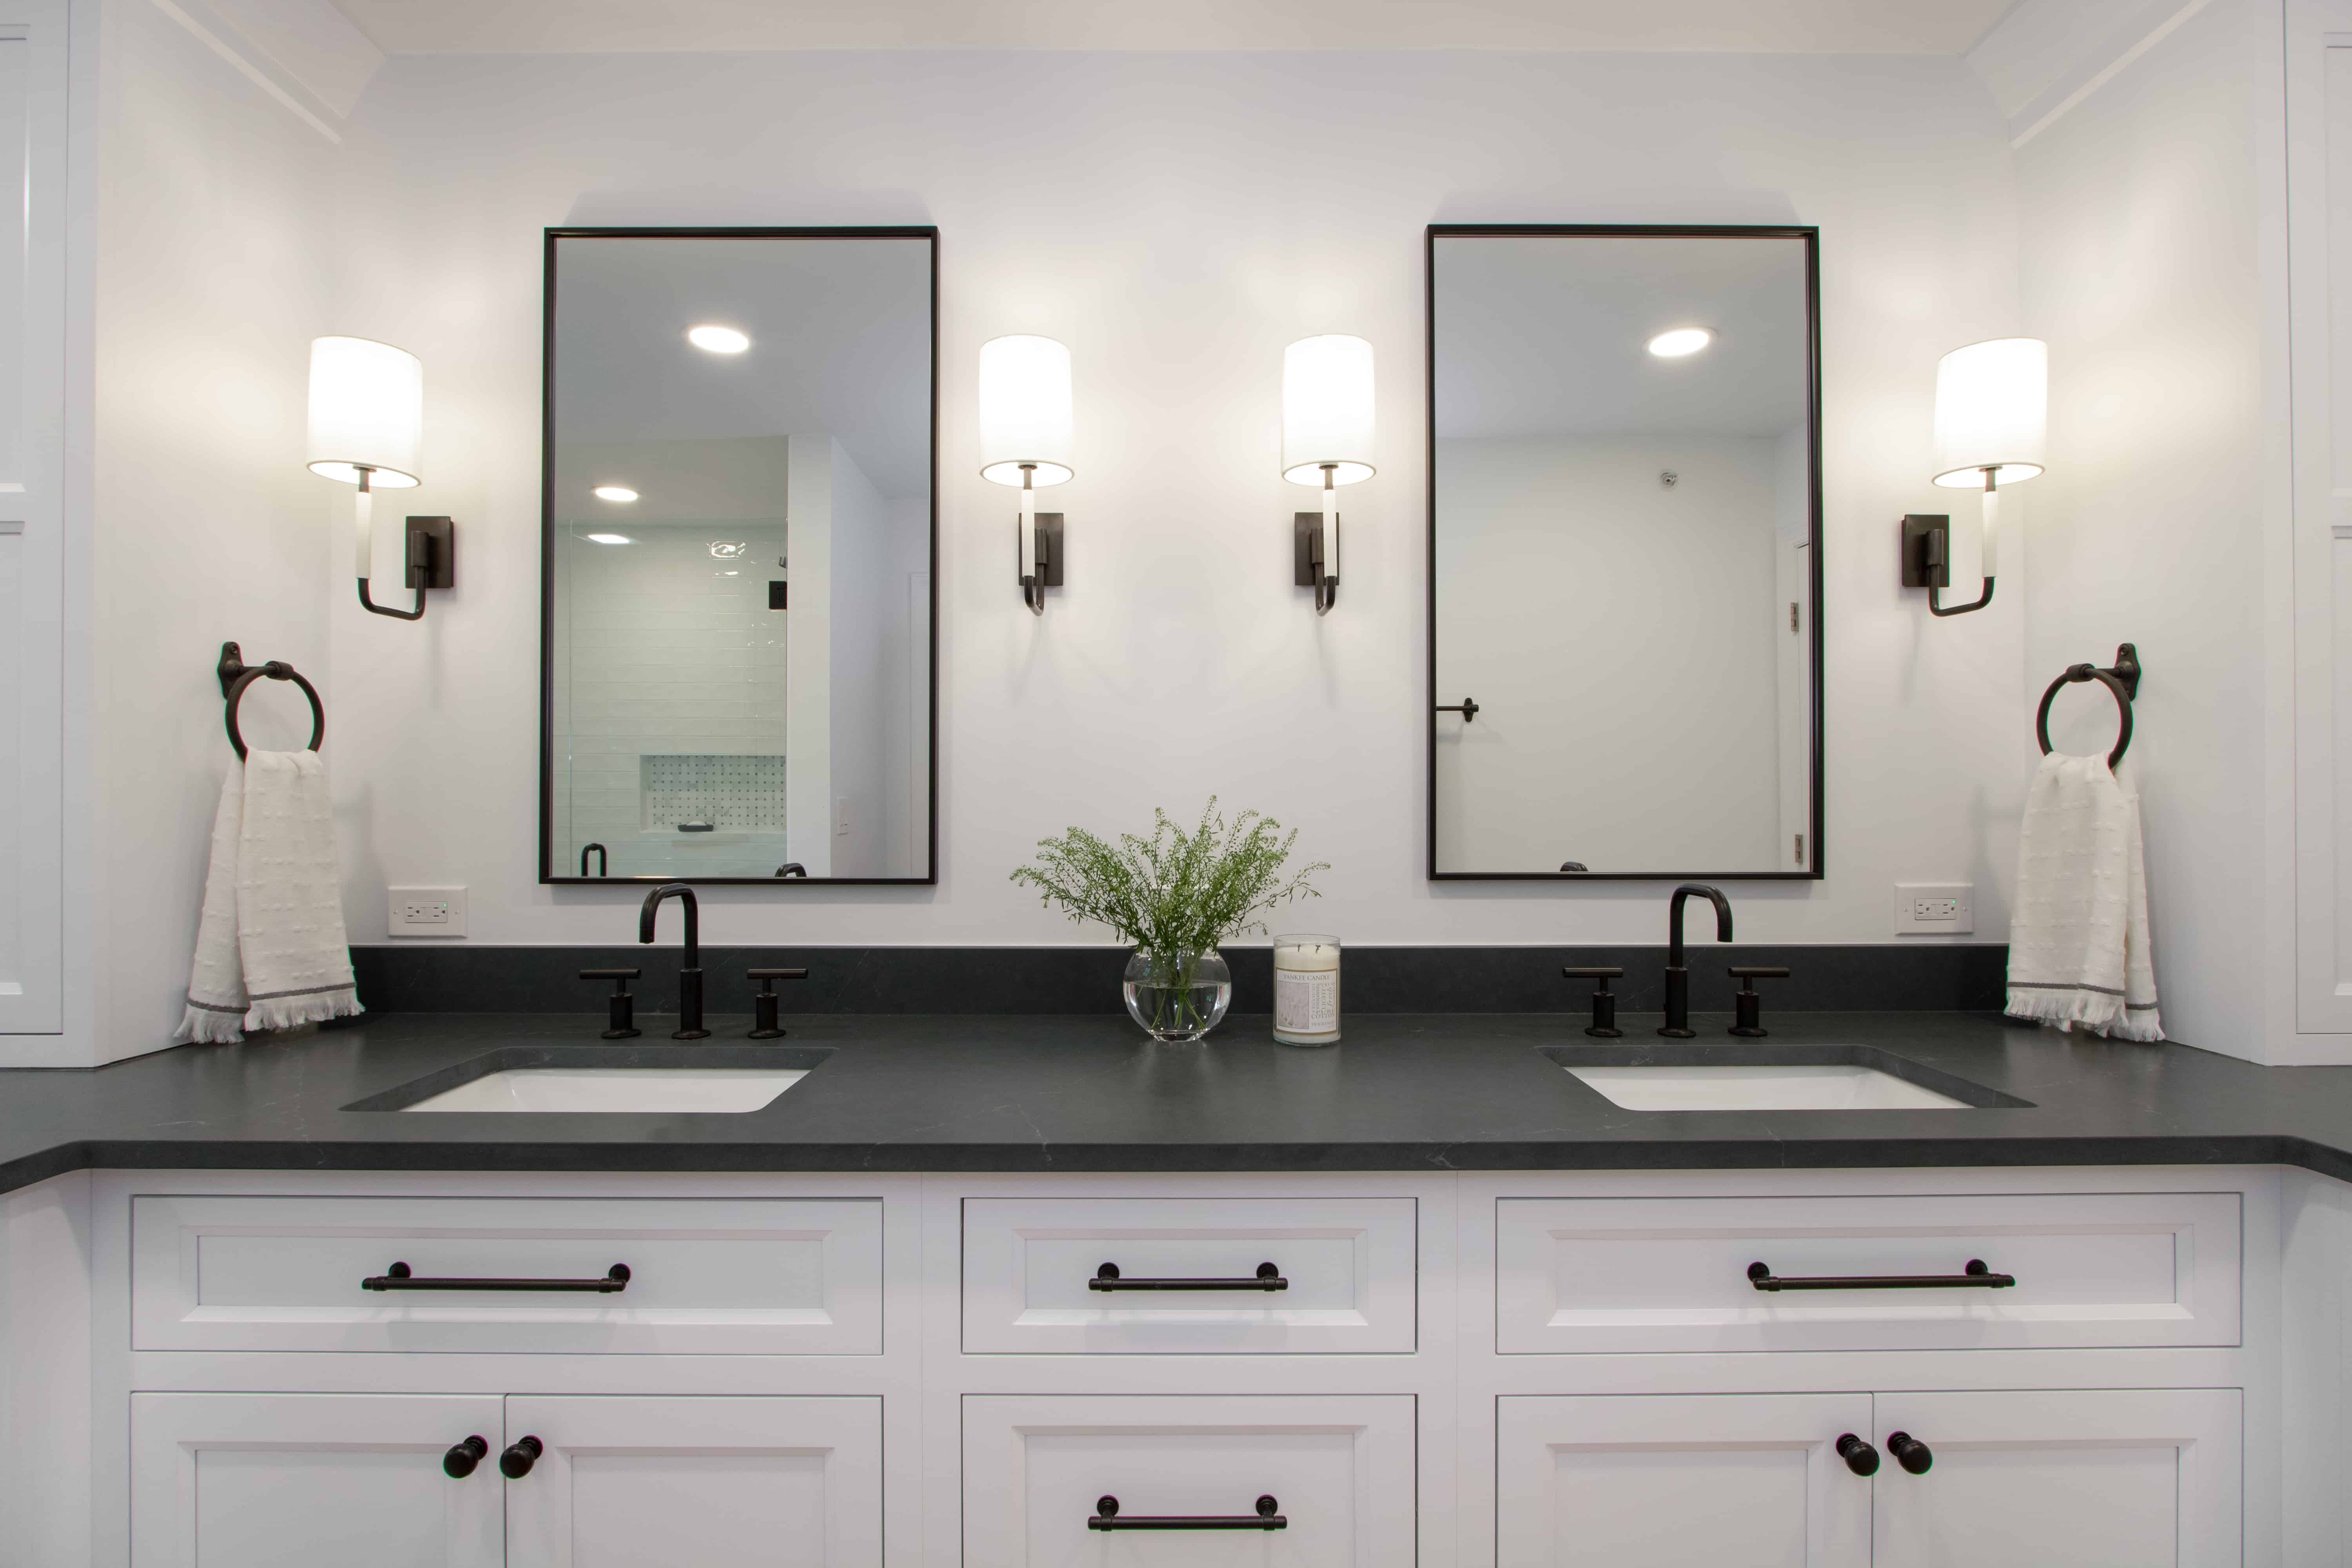 Bathroom Remodeling Project located in Long Grove, Illinois